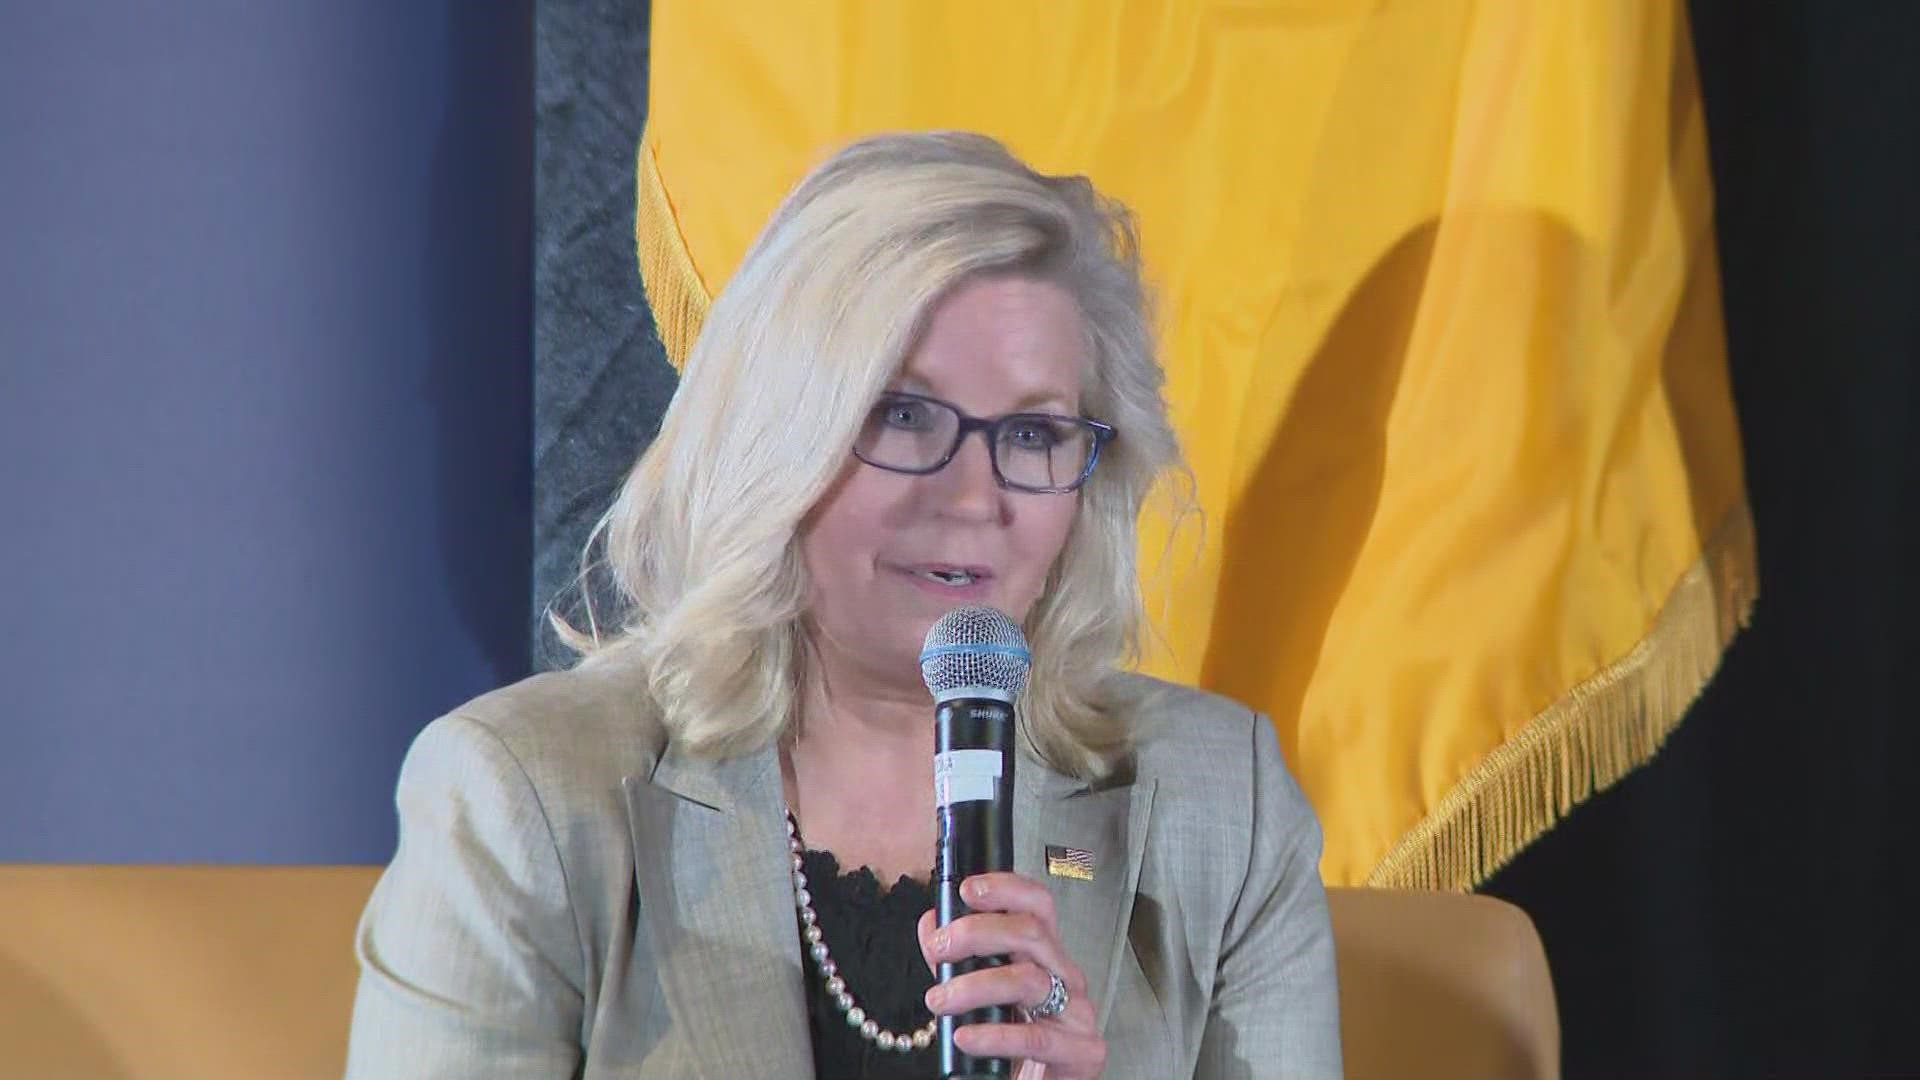 The McCain Institute at ASU hosted Congresswoman Liz Cheney for a conversation that focused on leadership, voting and civic engagement.